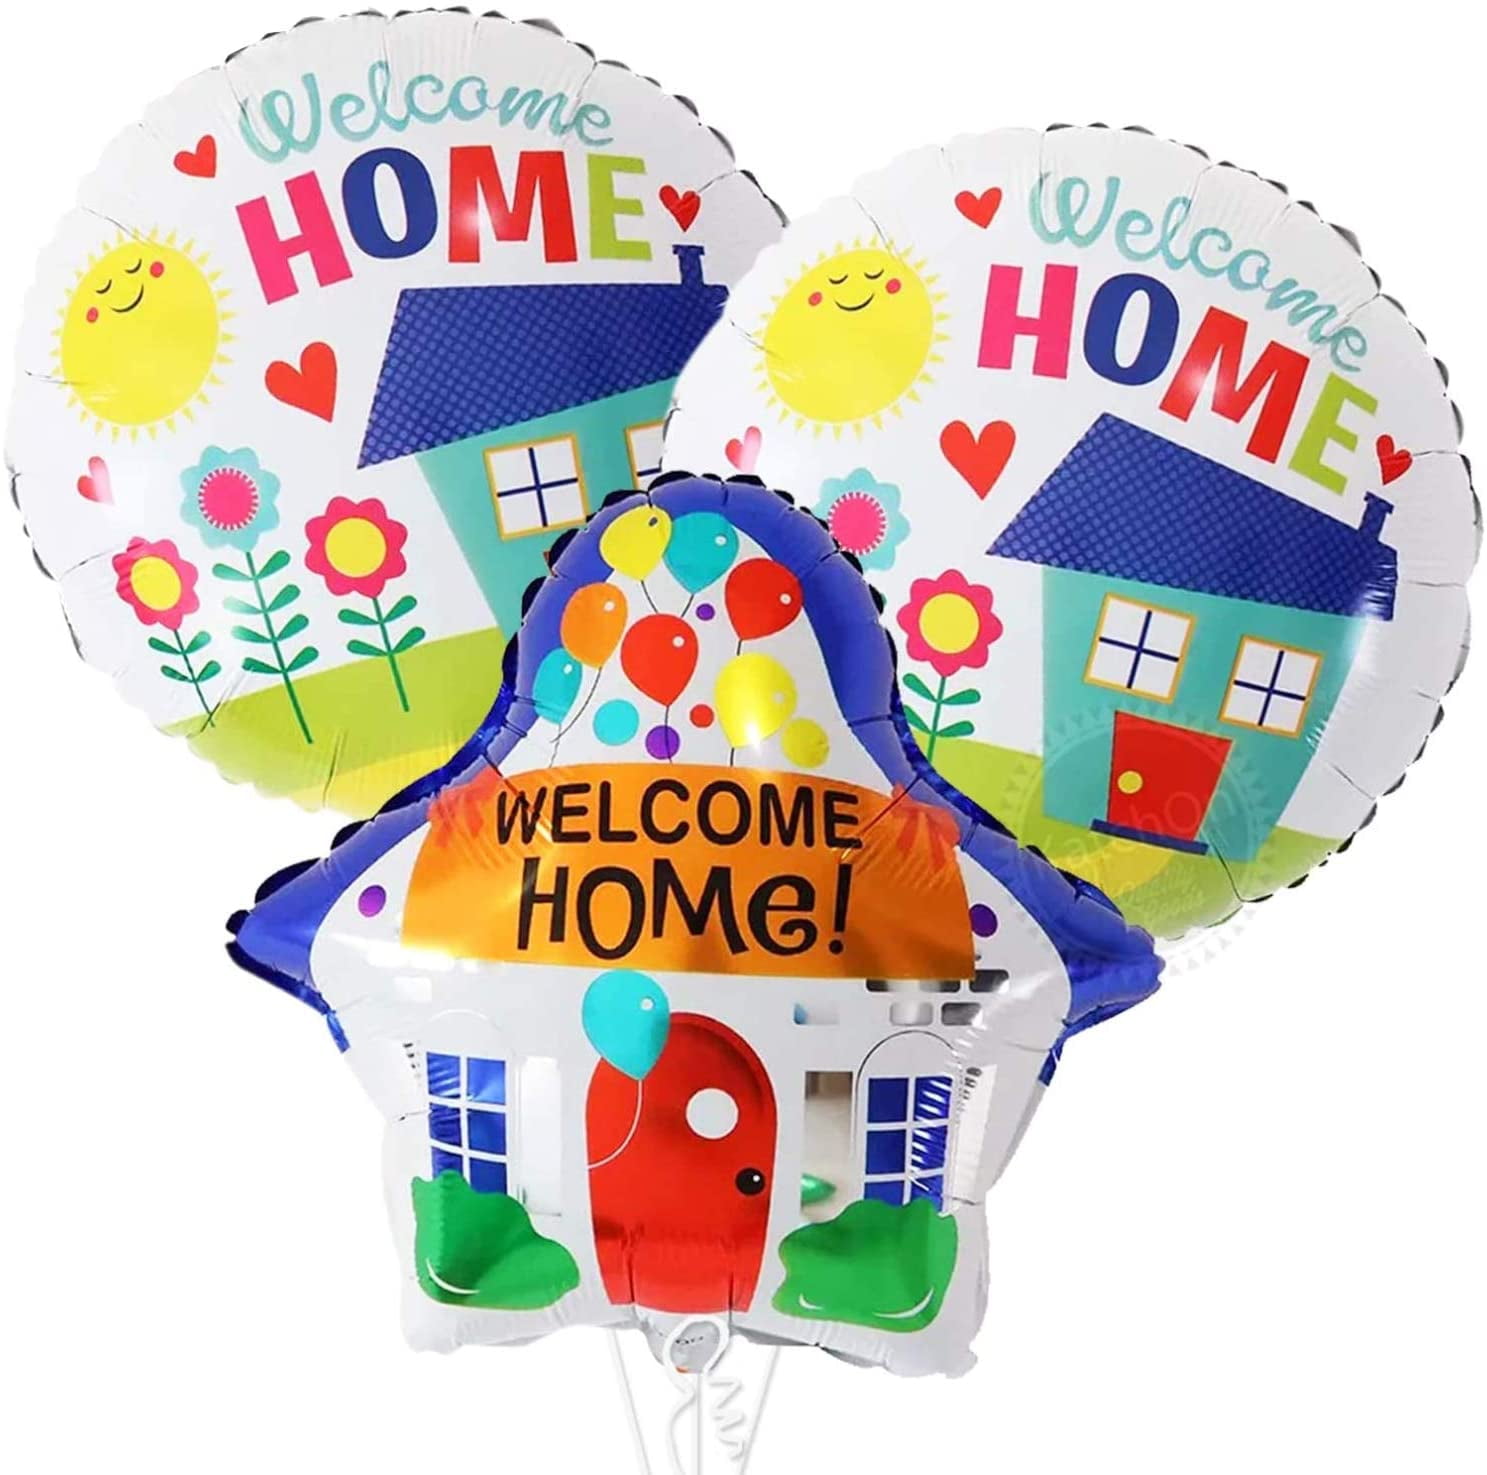 School University Welcome Home Celebration Pk of 10 Party Latex Balloons 995594 